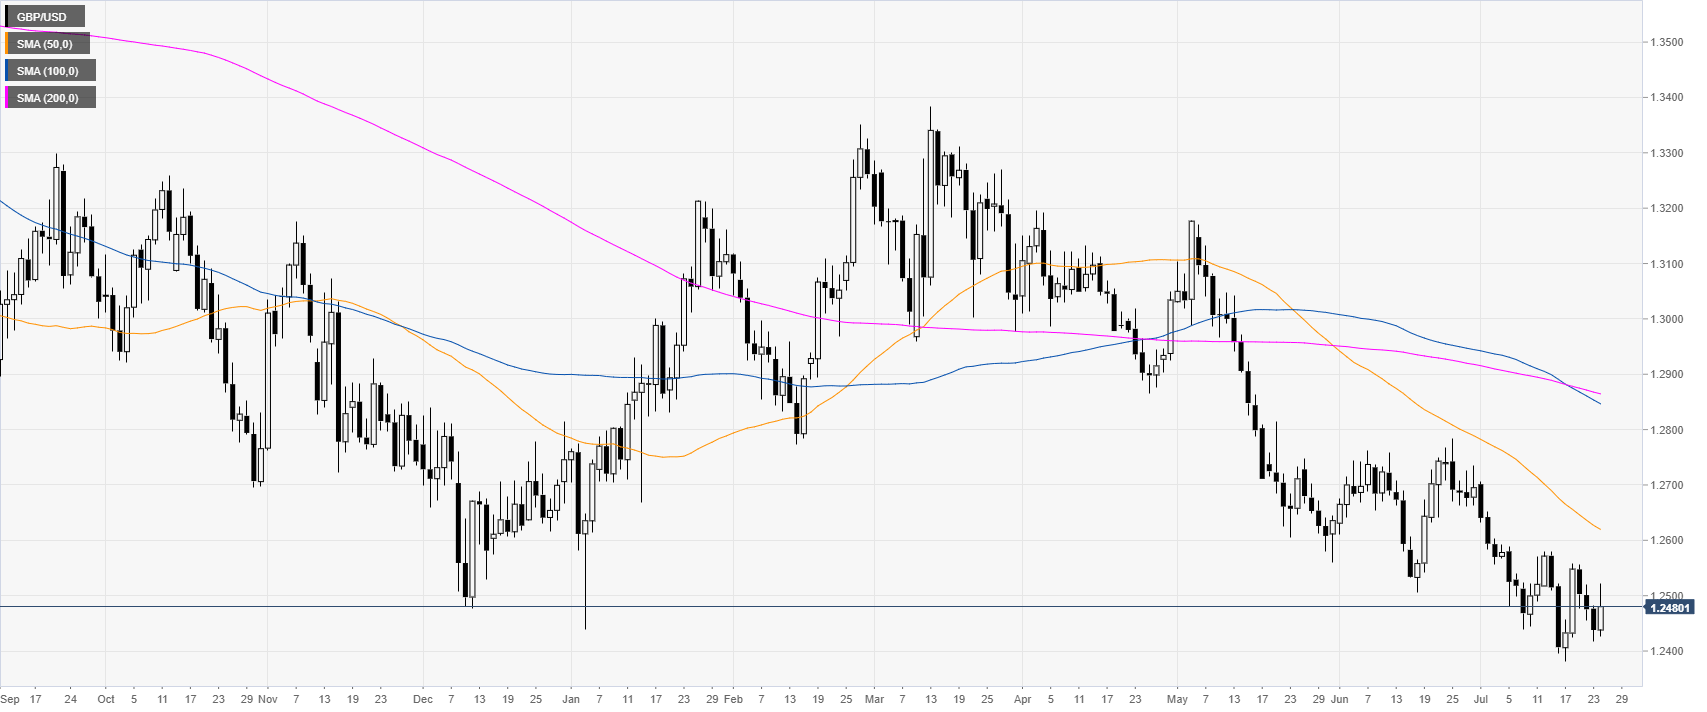 Gbp Usd Technical Analysis Cable Rolling Into The Asian Session - 